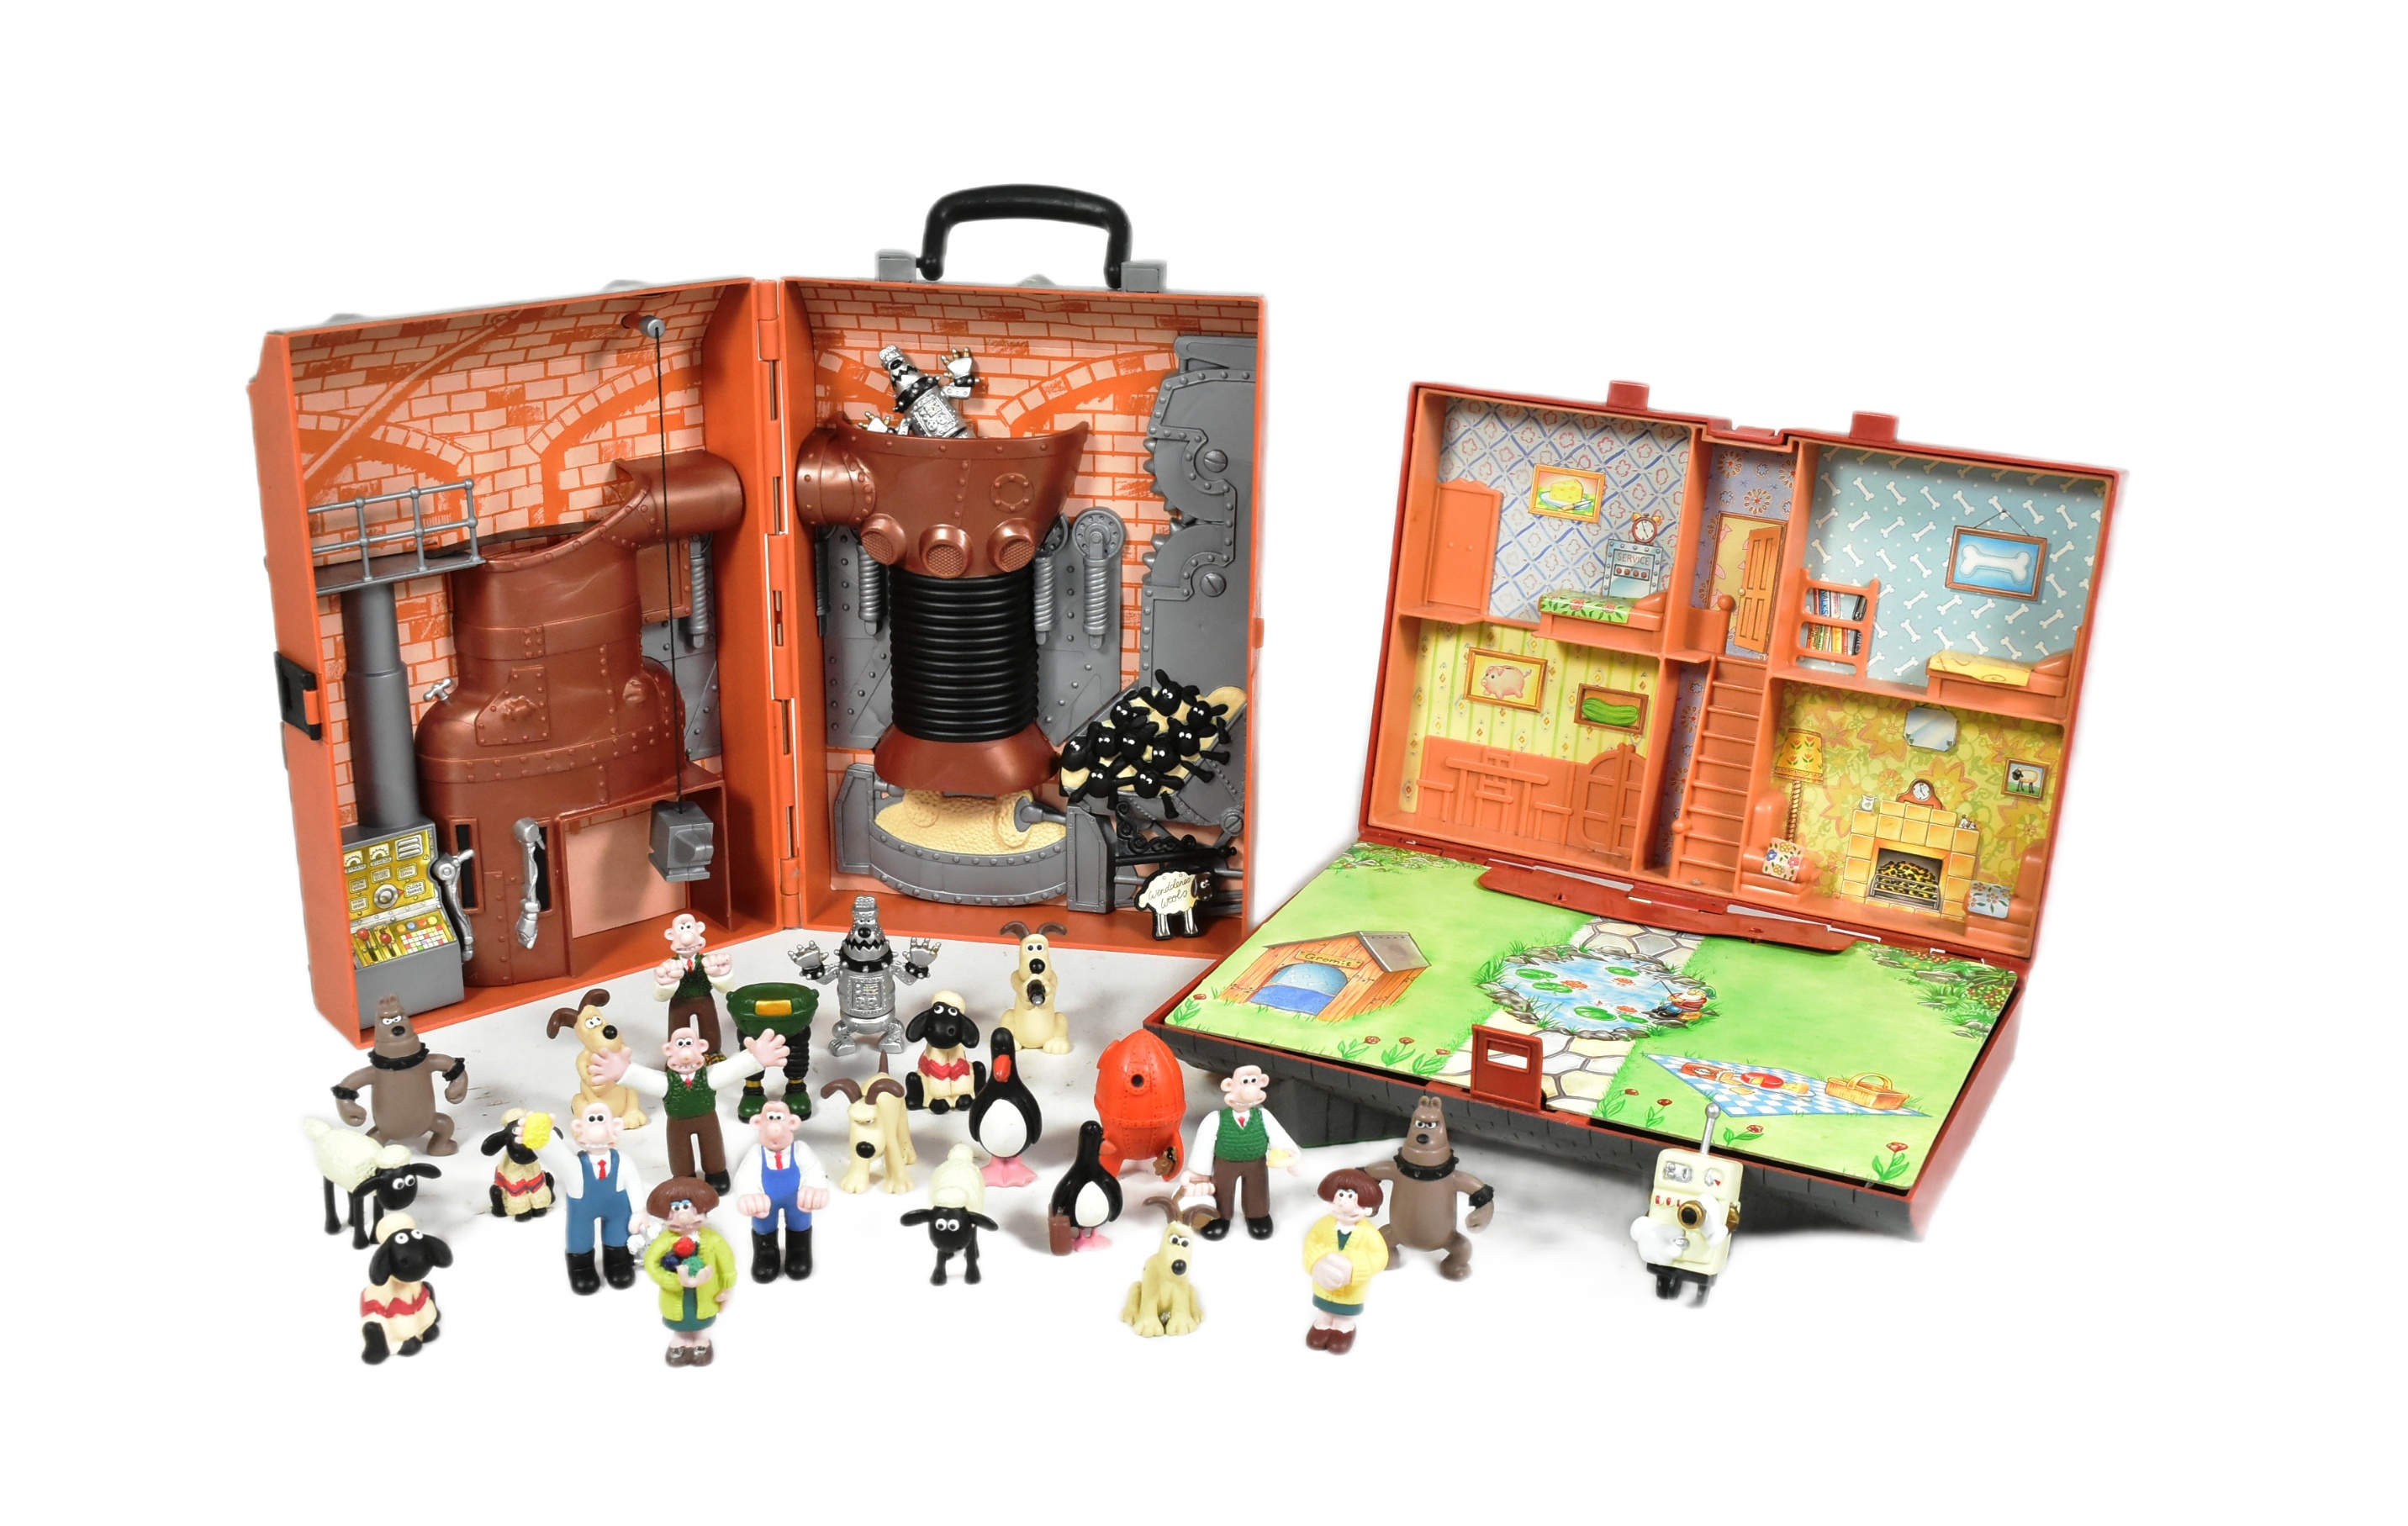 WALLACE & GROMIT - VINTAGE CARRY CASE PLAYSETS